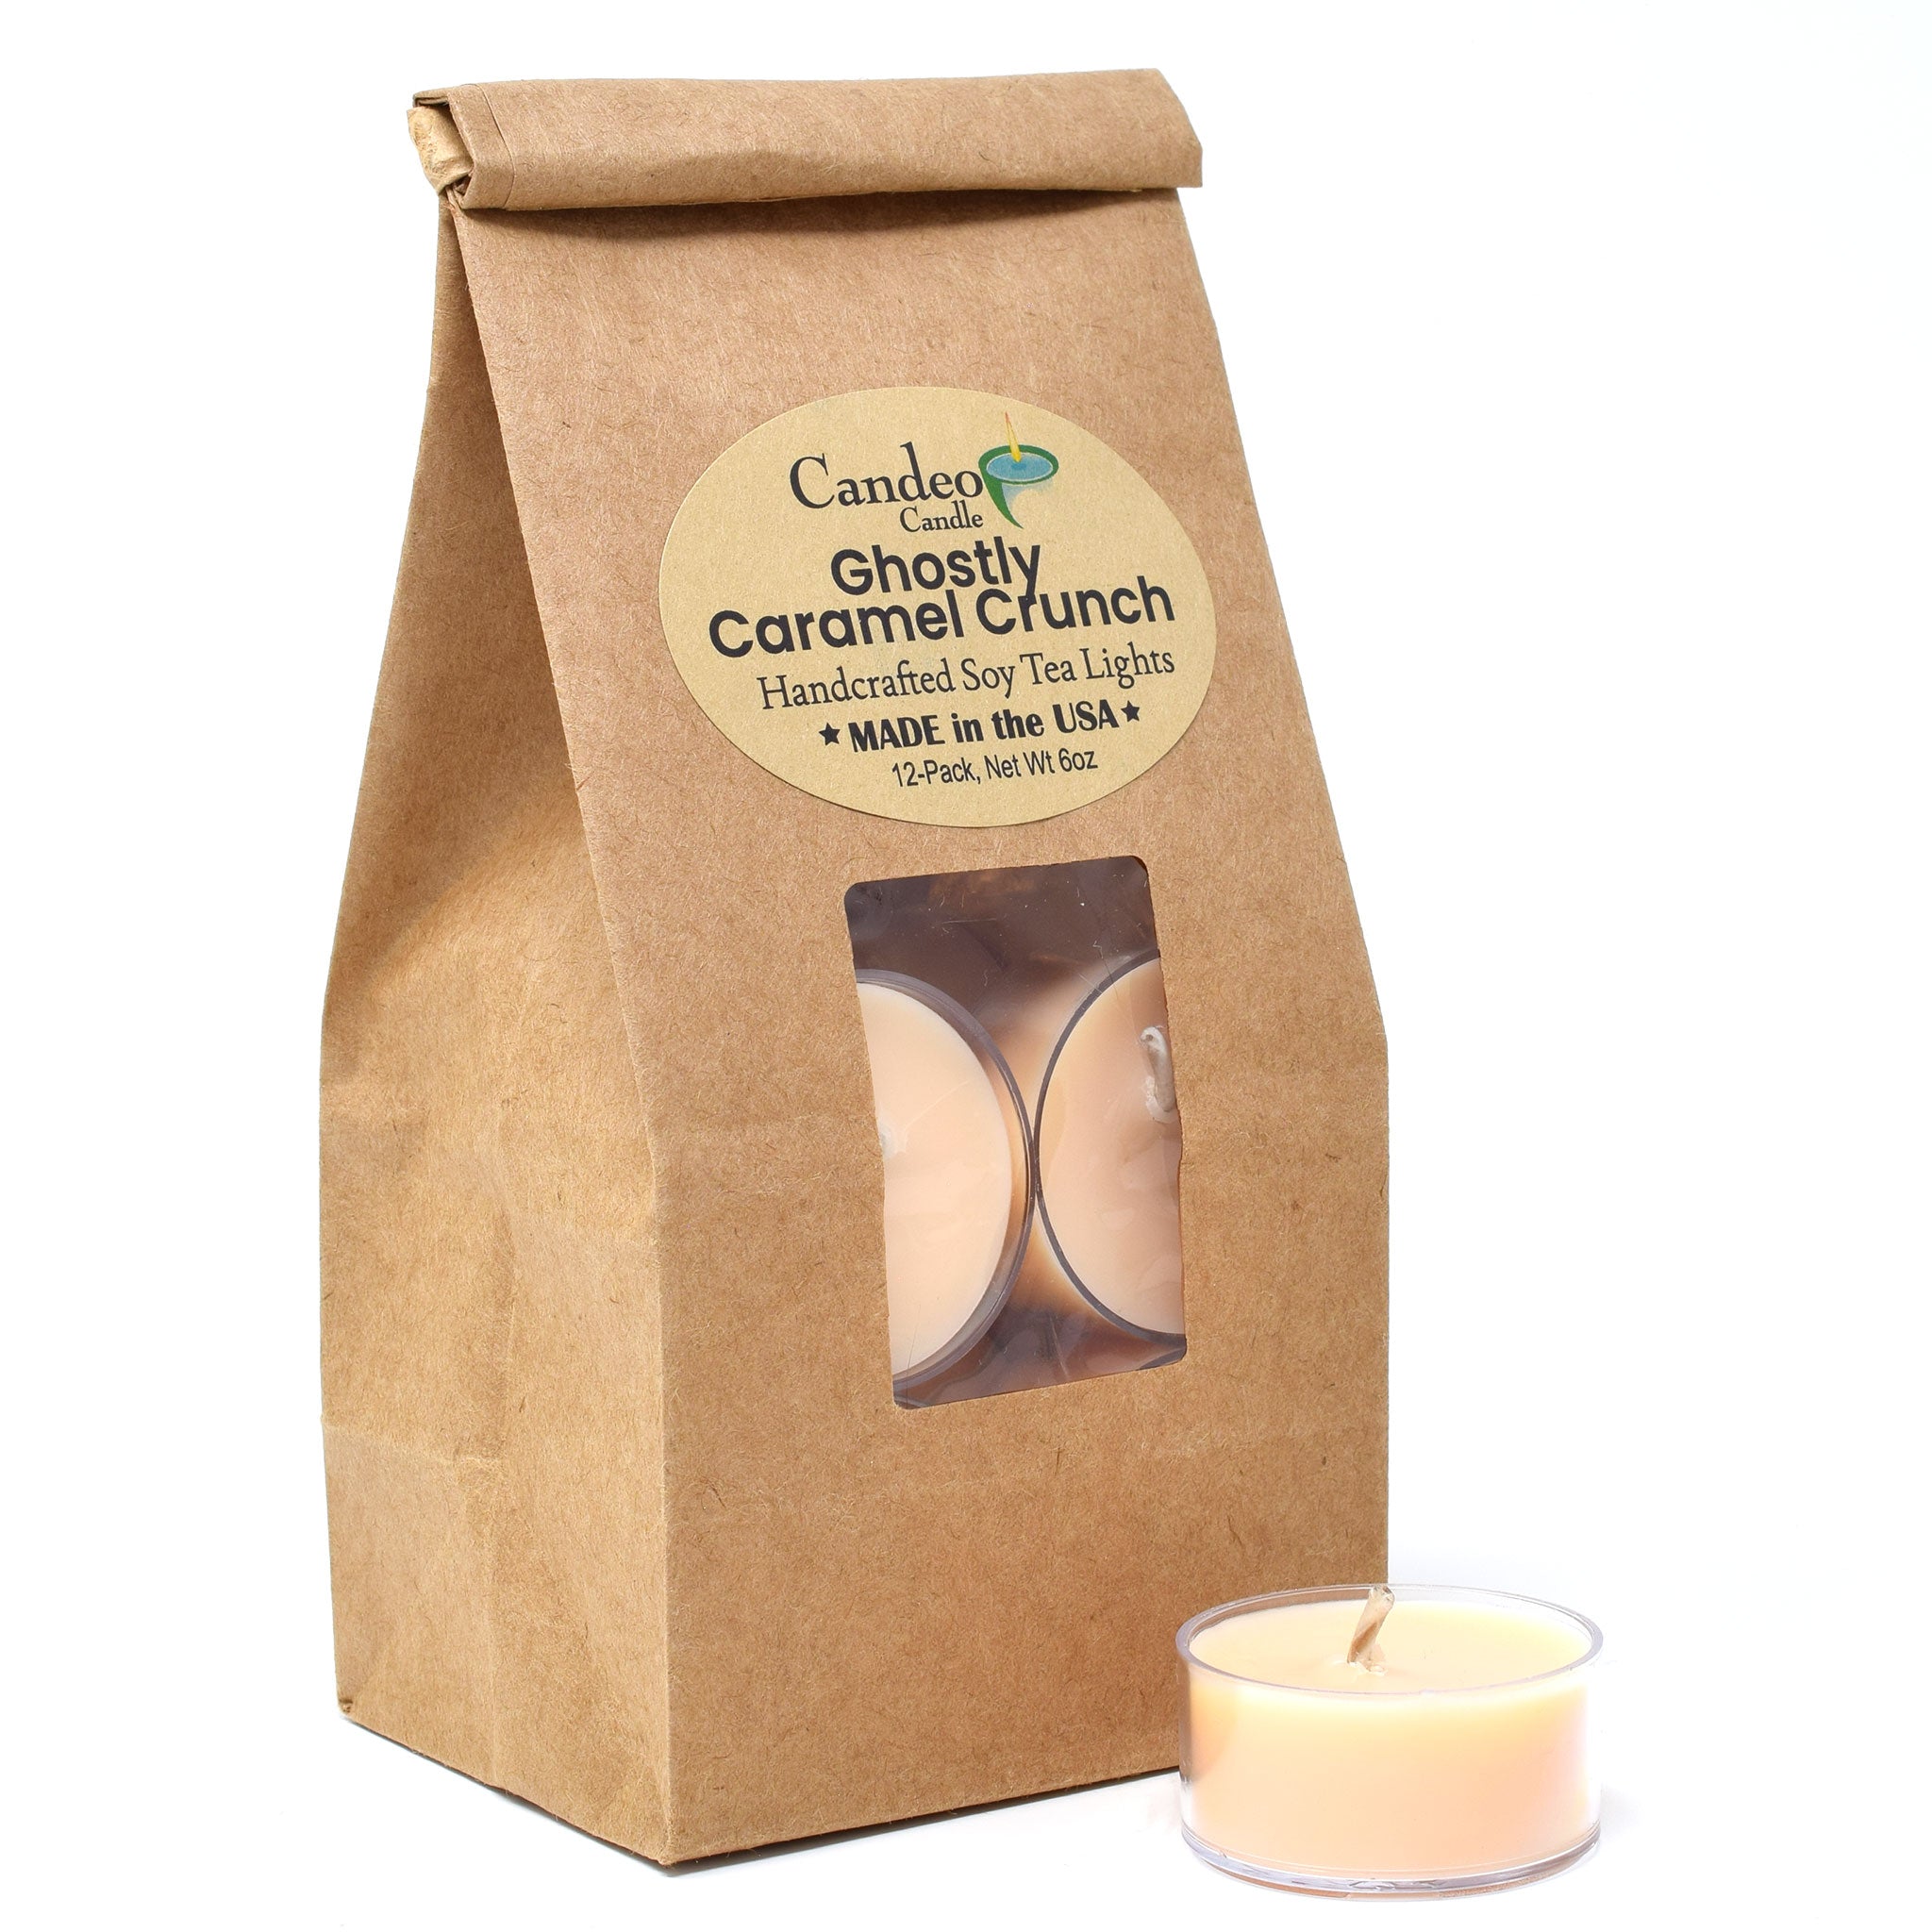 Ghostly Caramel Crunch, Soy Tea Light 12-Pack - Candeo Candle